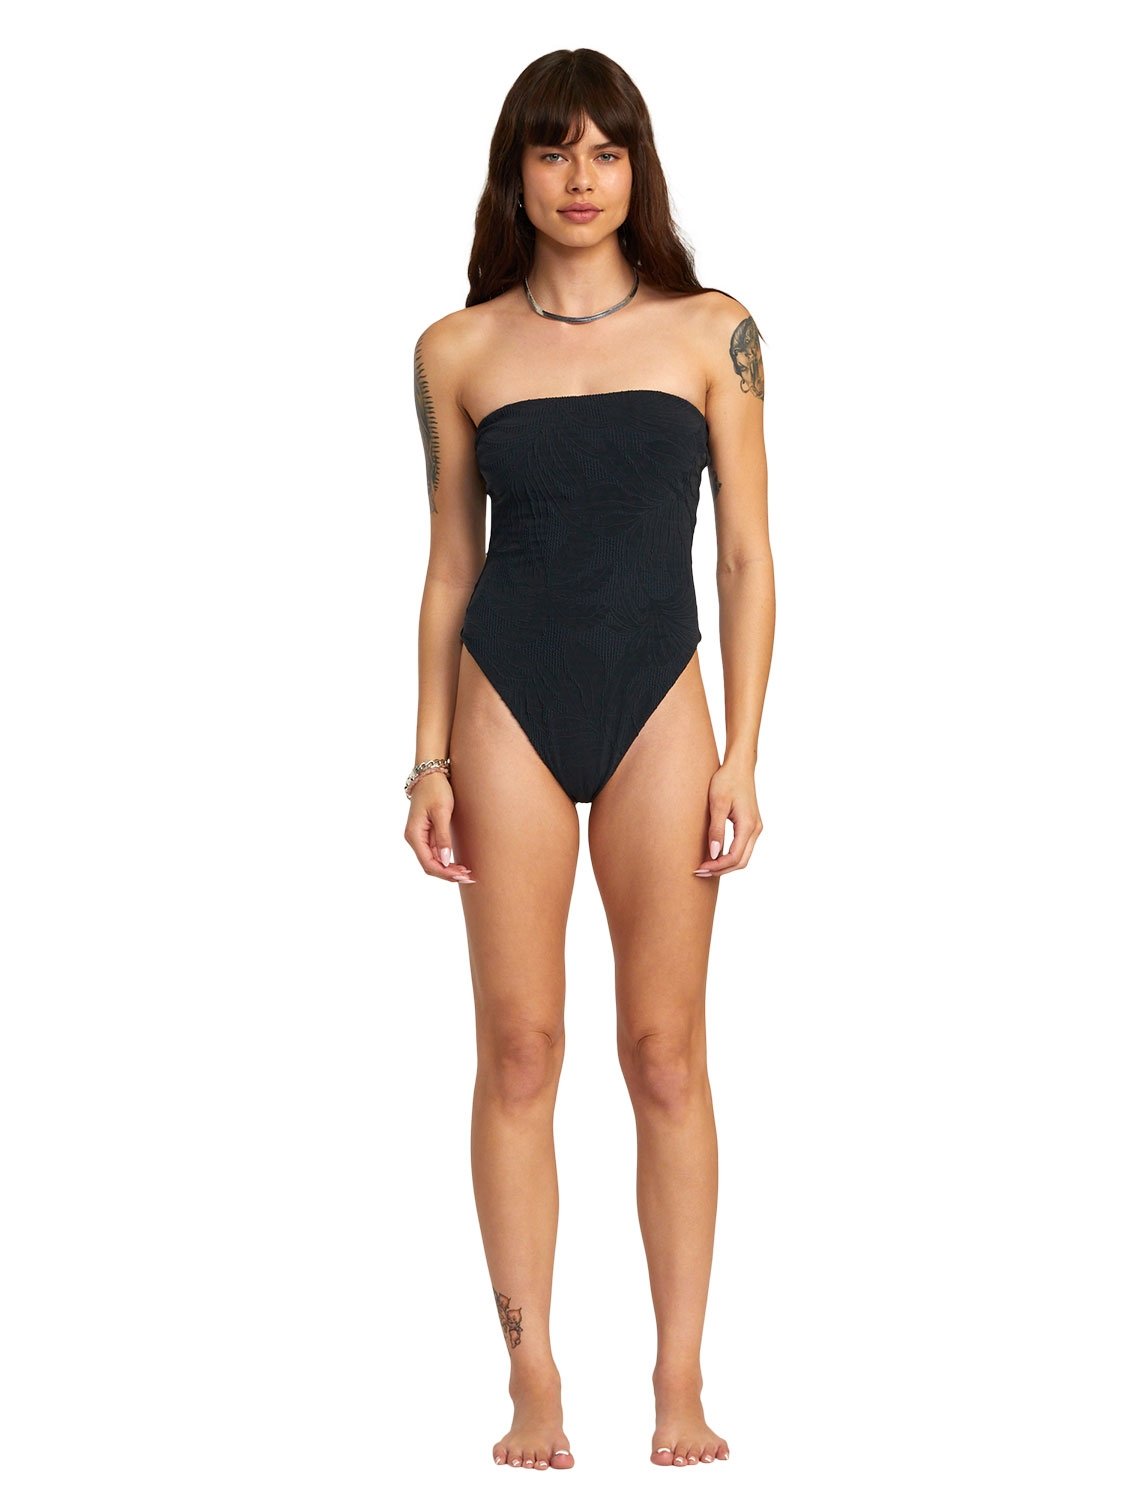 RVCA Ladies Palm Grooves Tubular One-Piece